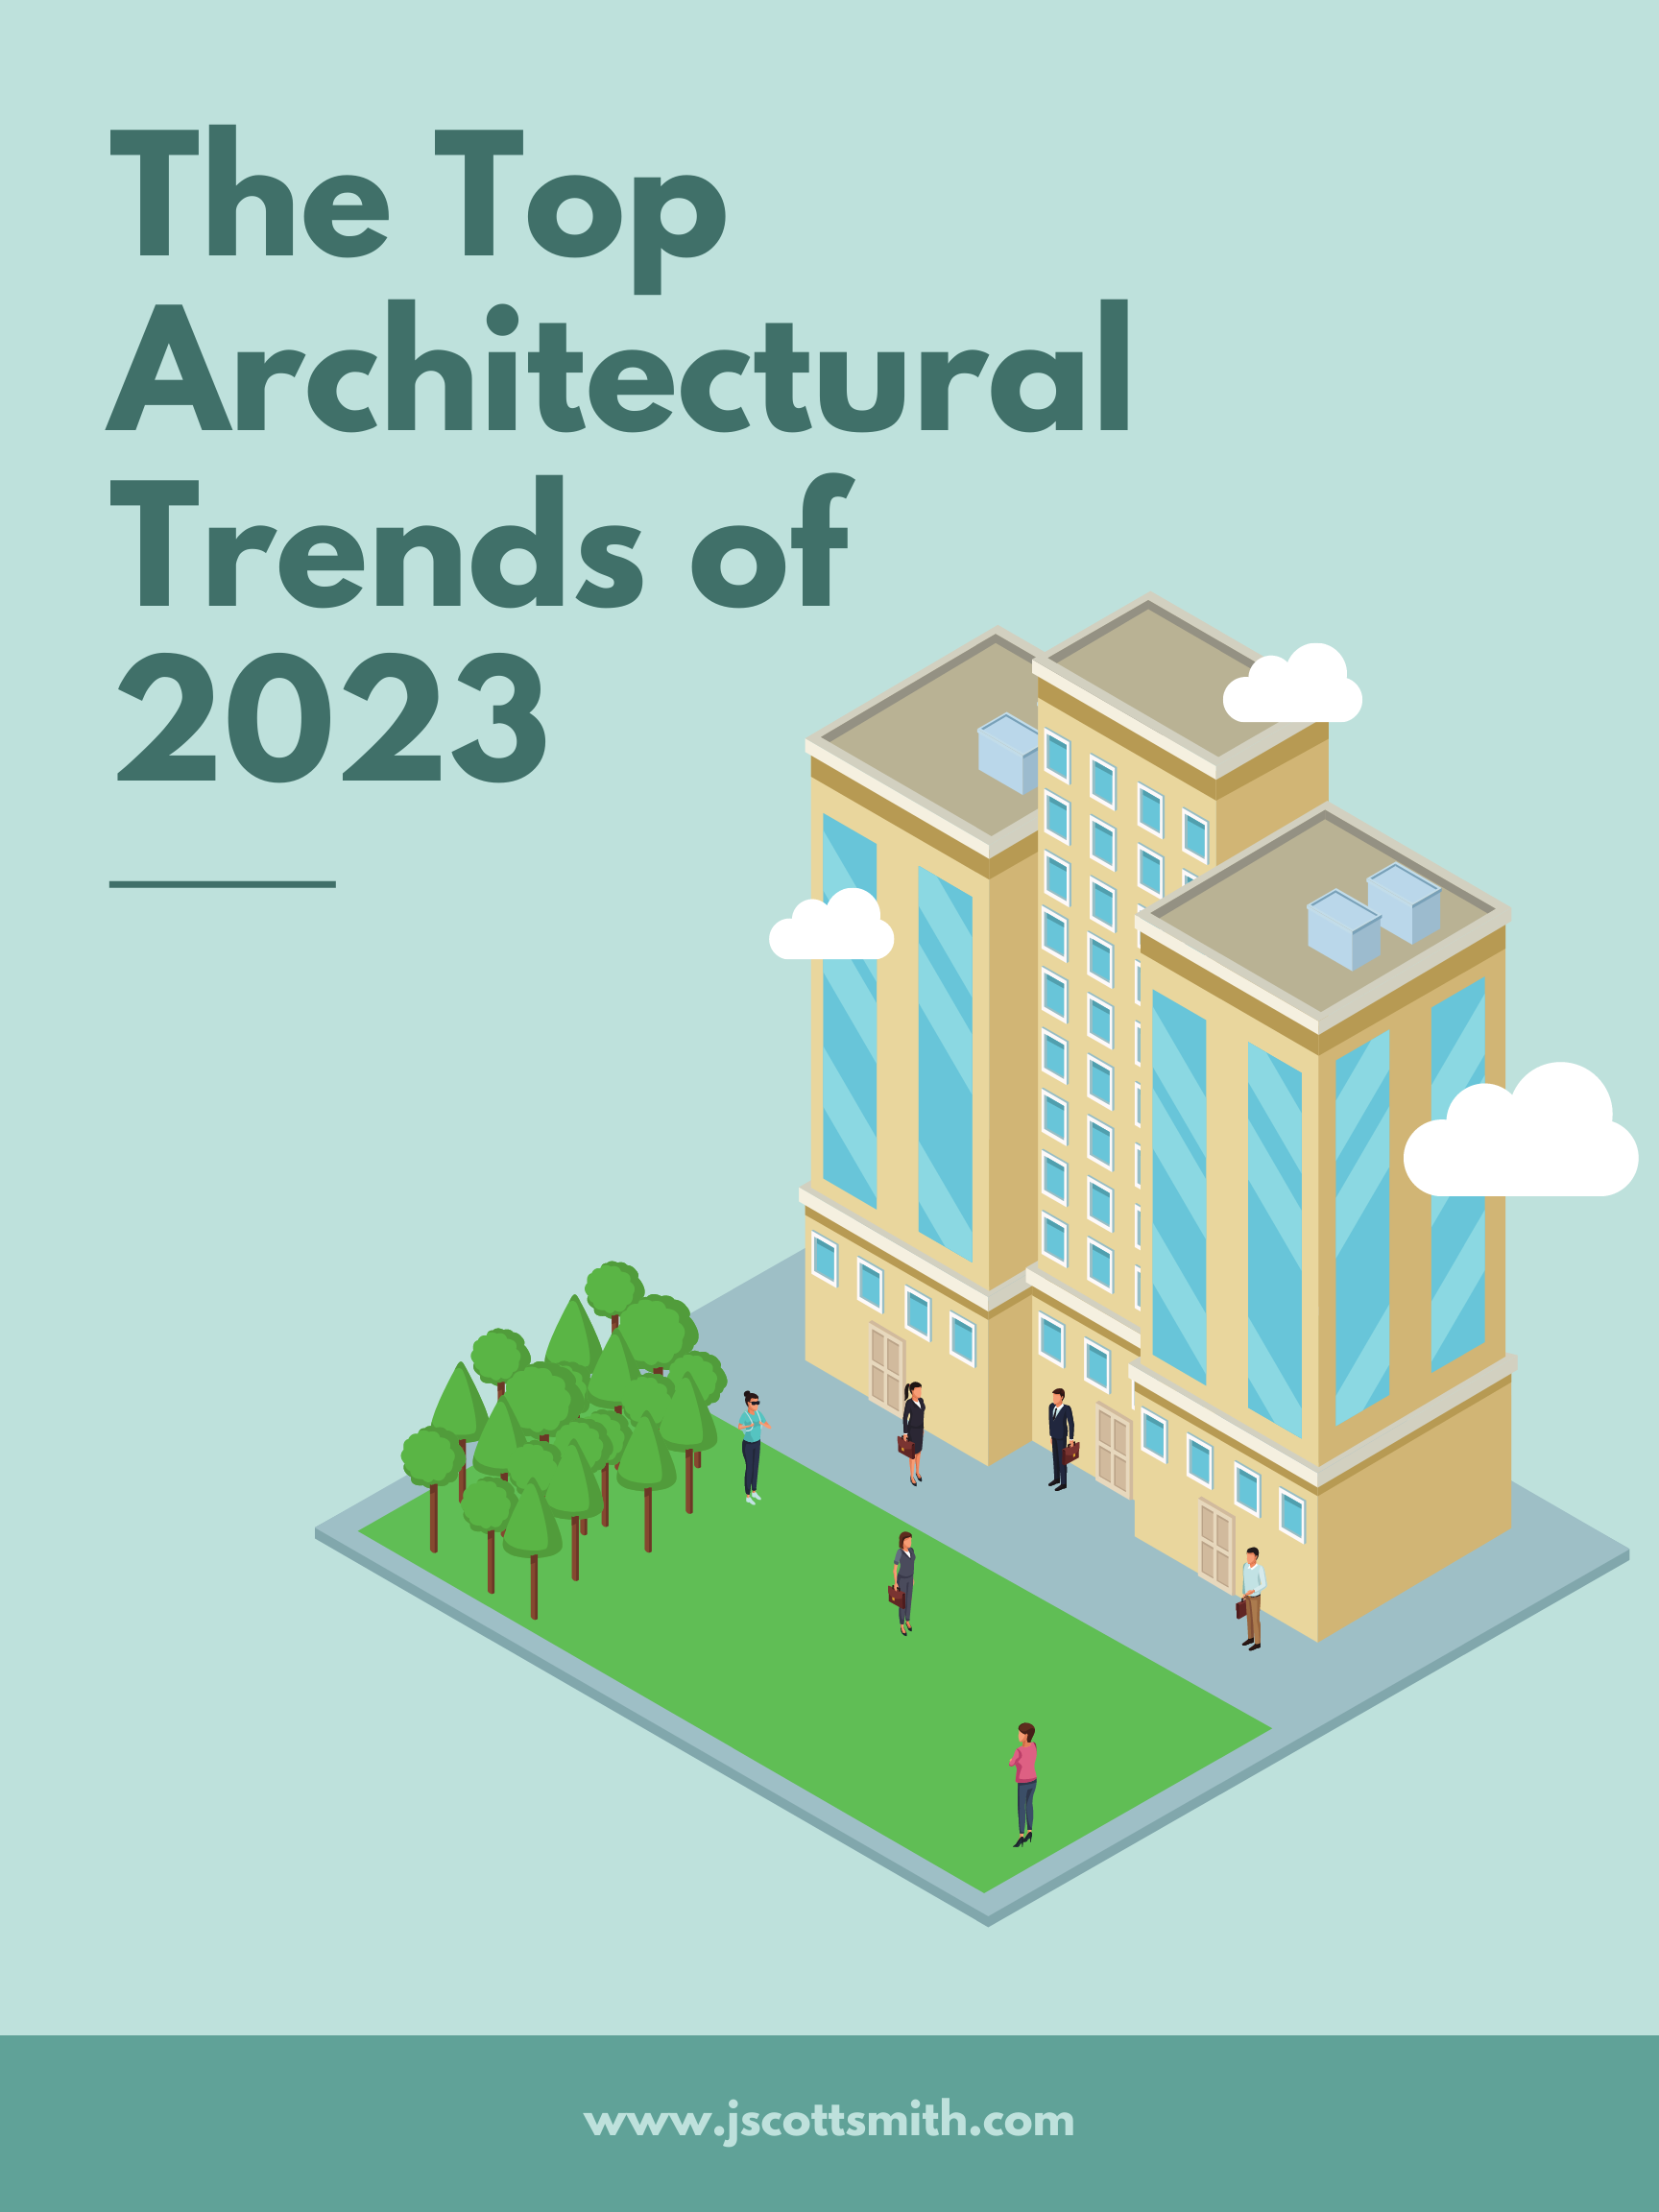 Image shows a cartoon of a building with people walking on the grass below. The background is blue and the words say 'the top architectural trends of 2023"